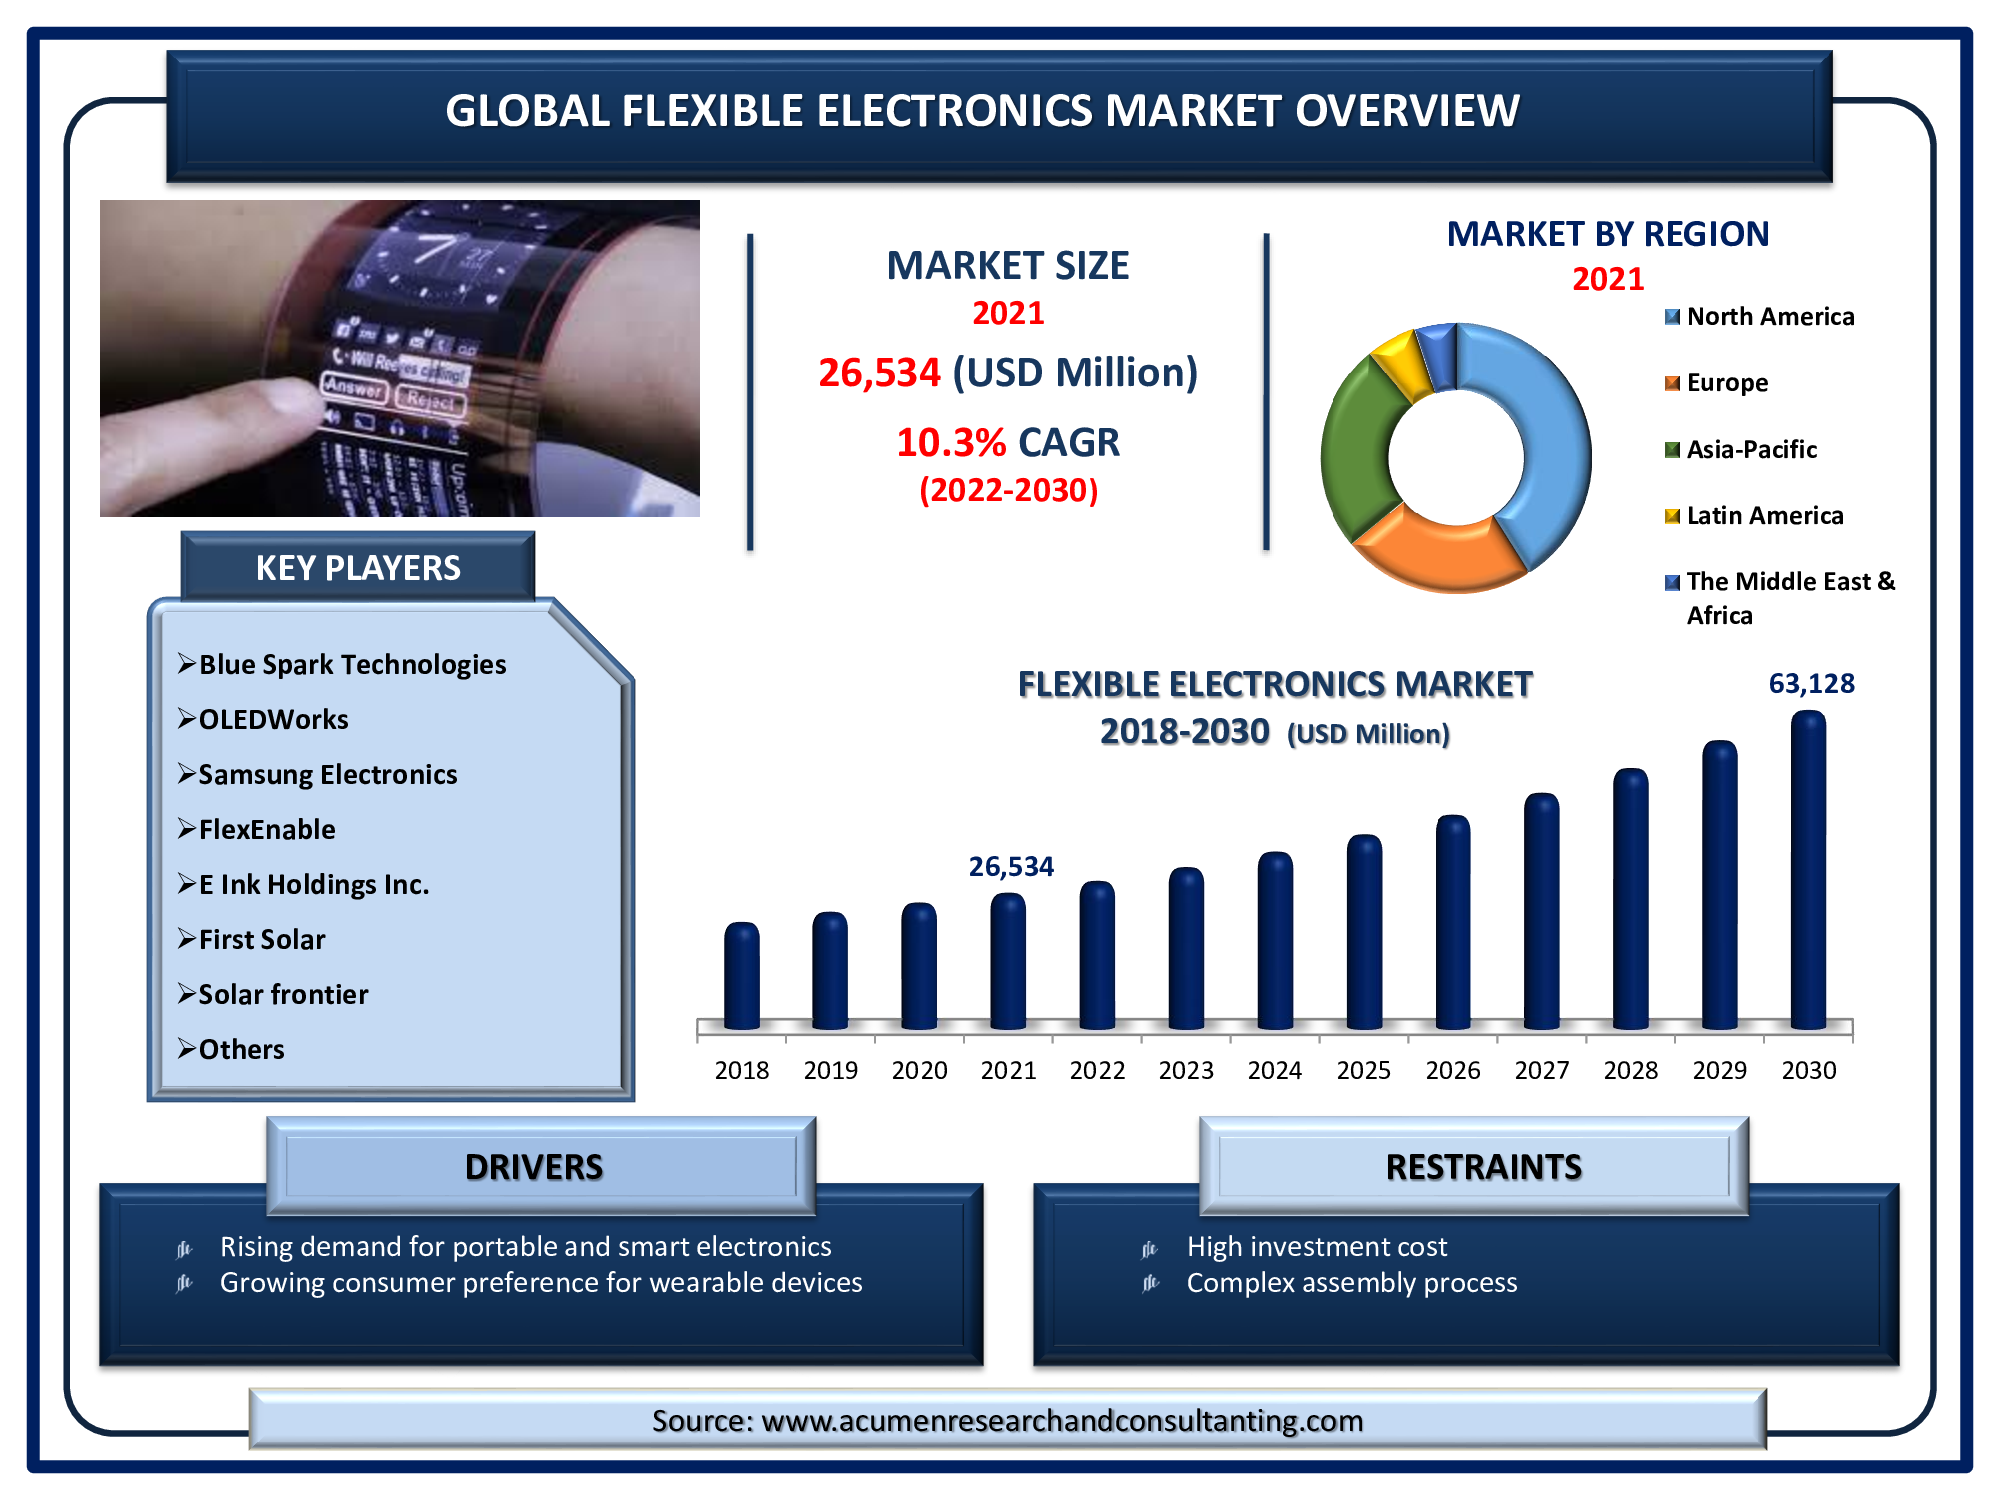 Global flexible electronics market size accounted for US$ 26,534 Mn in 2021, with a CAGR of 10.3% from 2022 to 2030